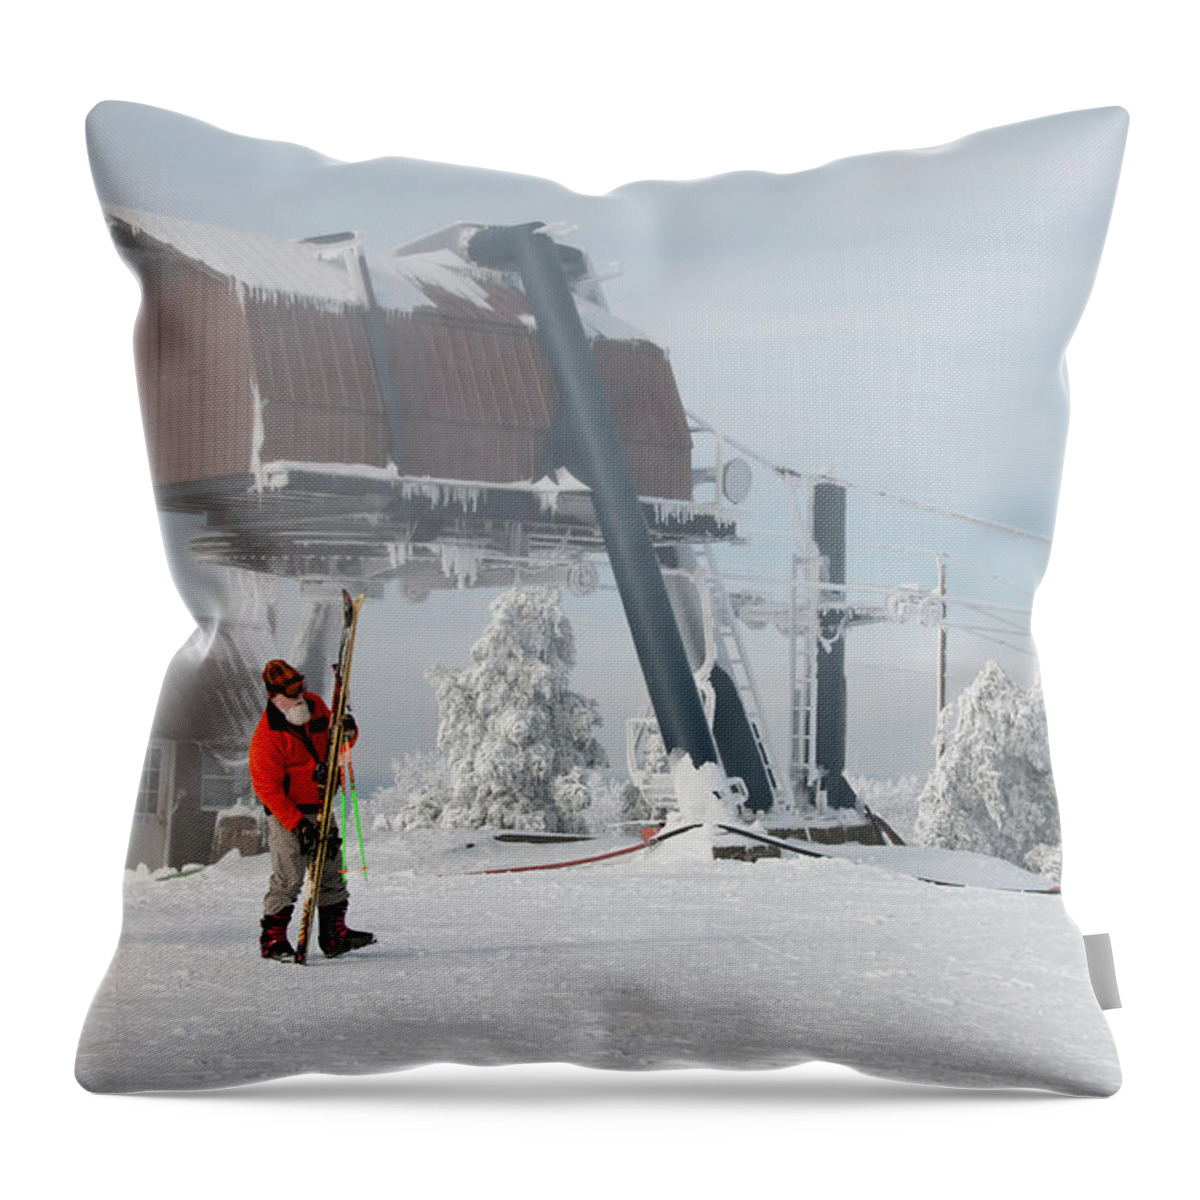 December 26th Throw Pillow featuring the photograph December 26th by Lois Bryan